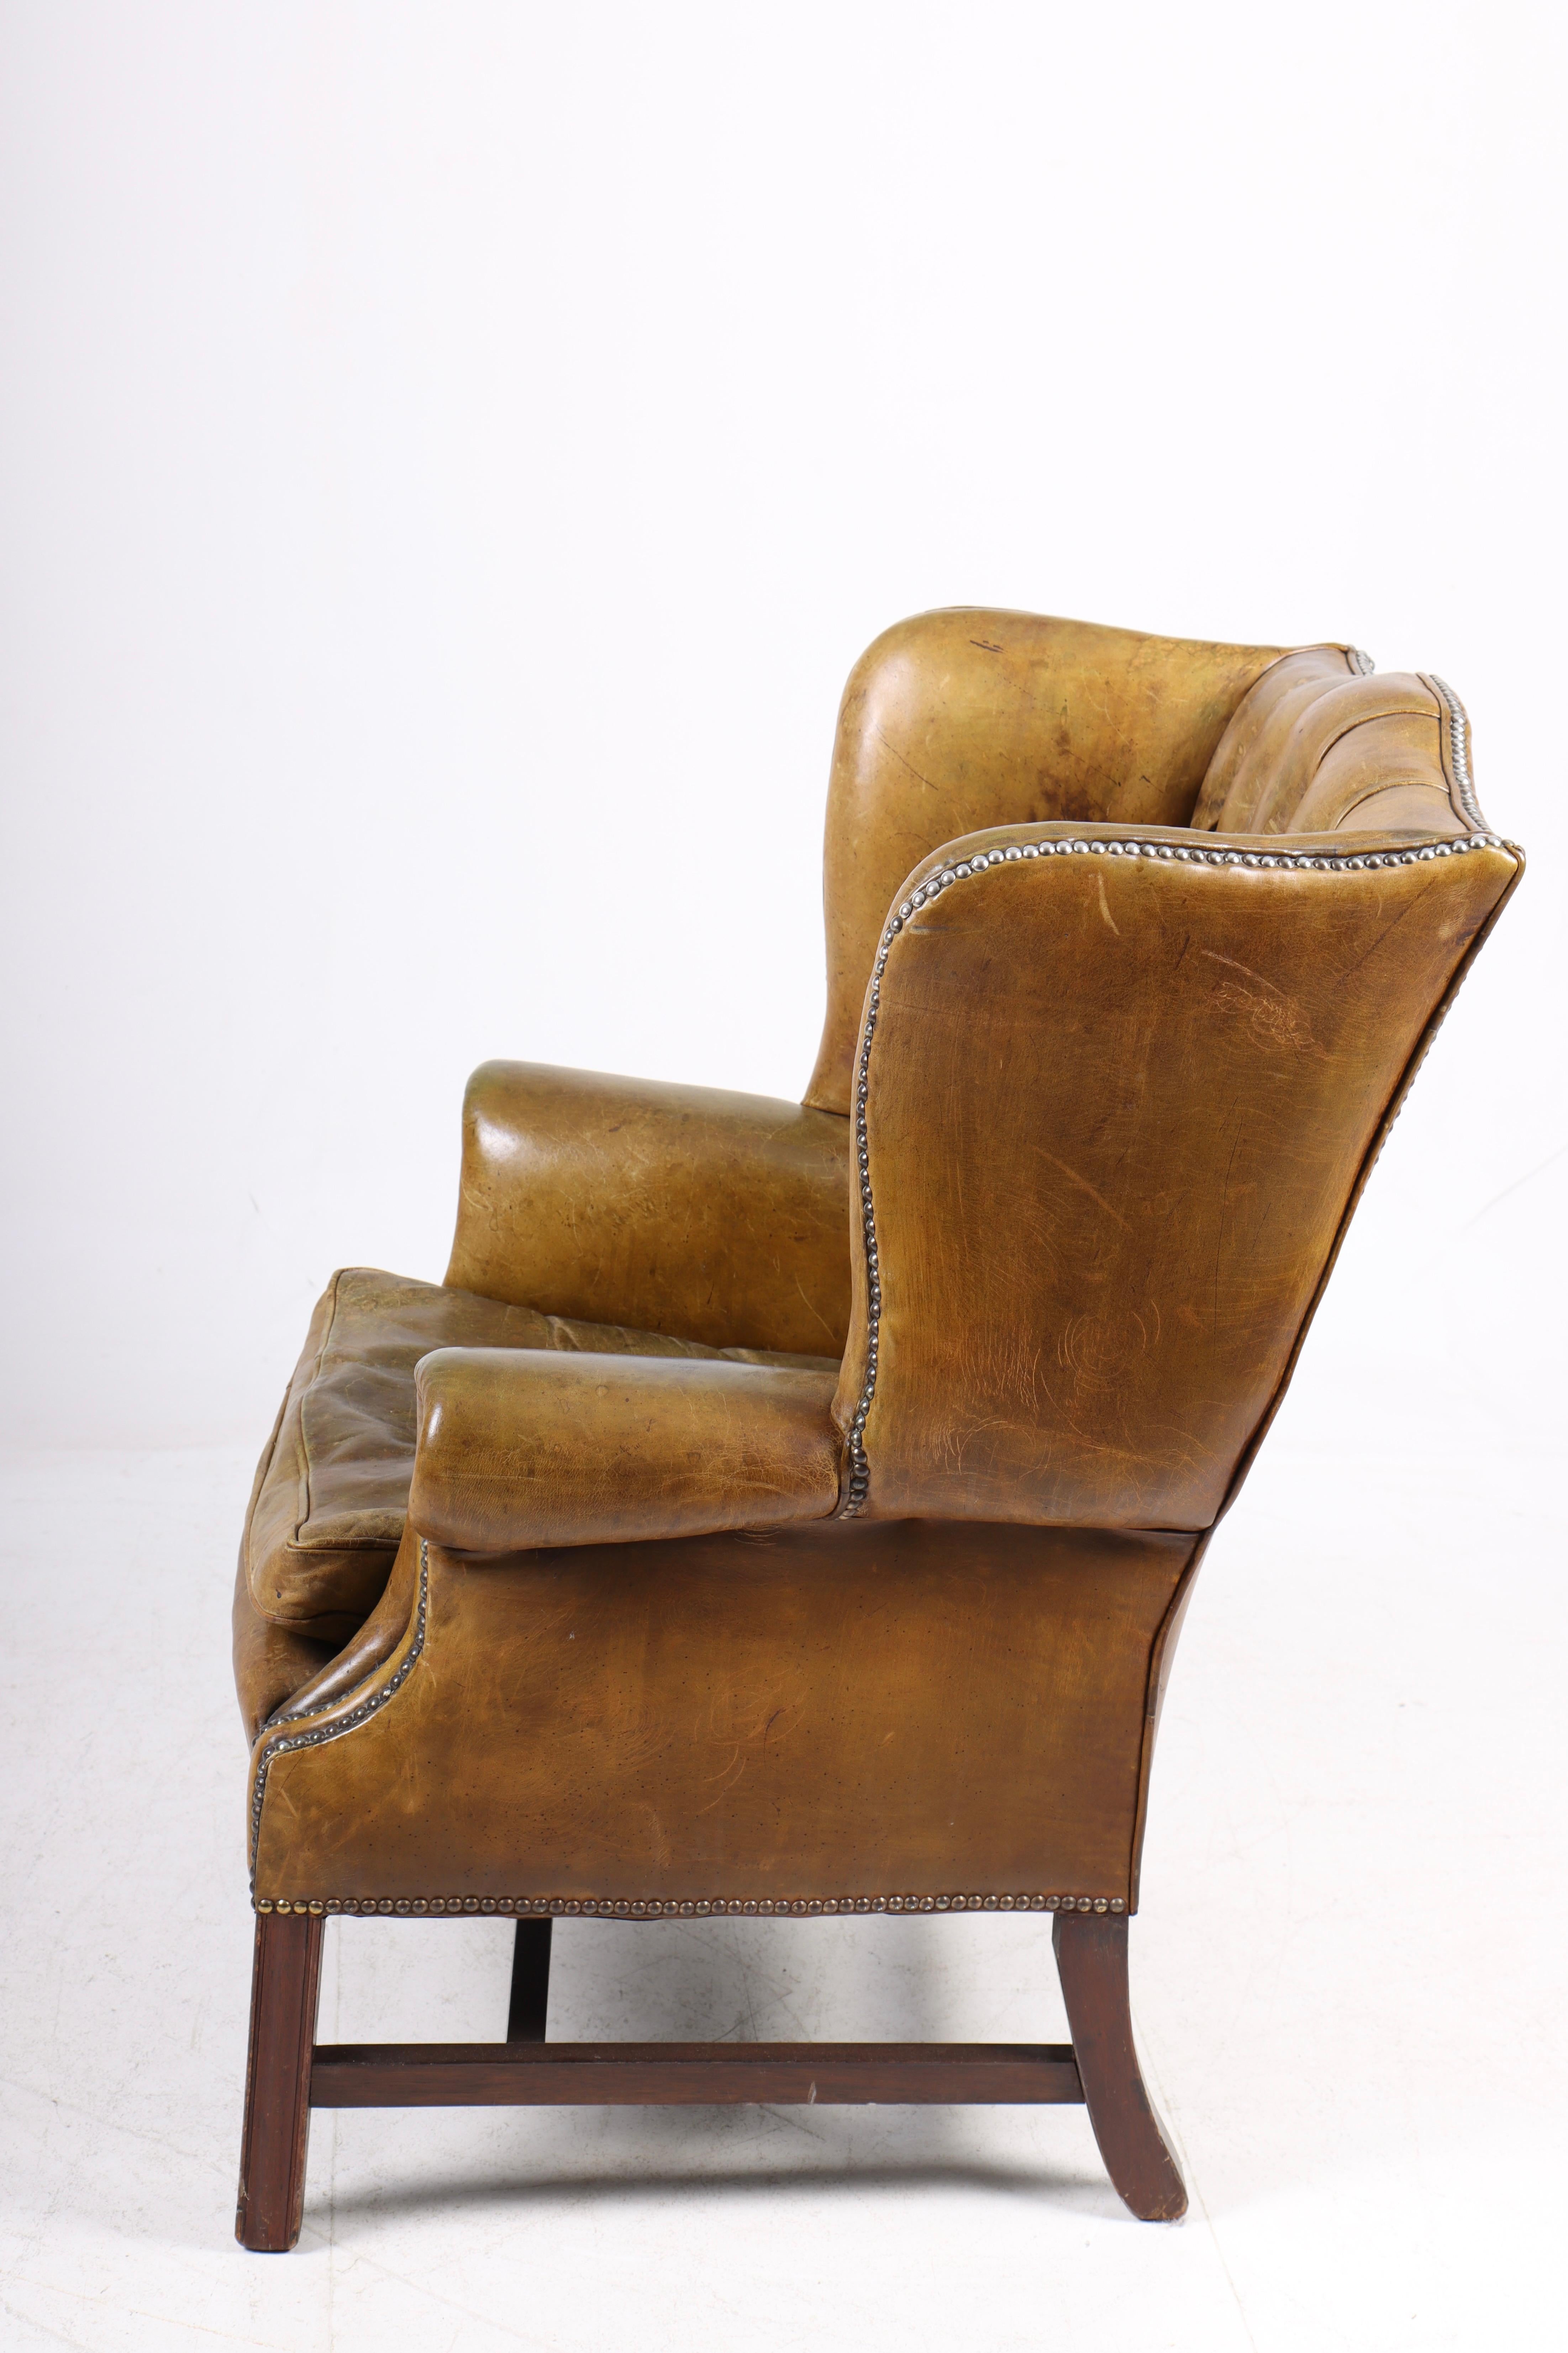 Scandinavian Modern Chesterfield Wingback Chair in Leather, Made in Denmark 1950s For Sale